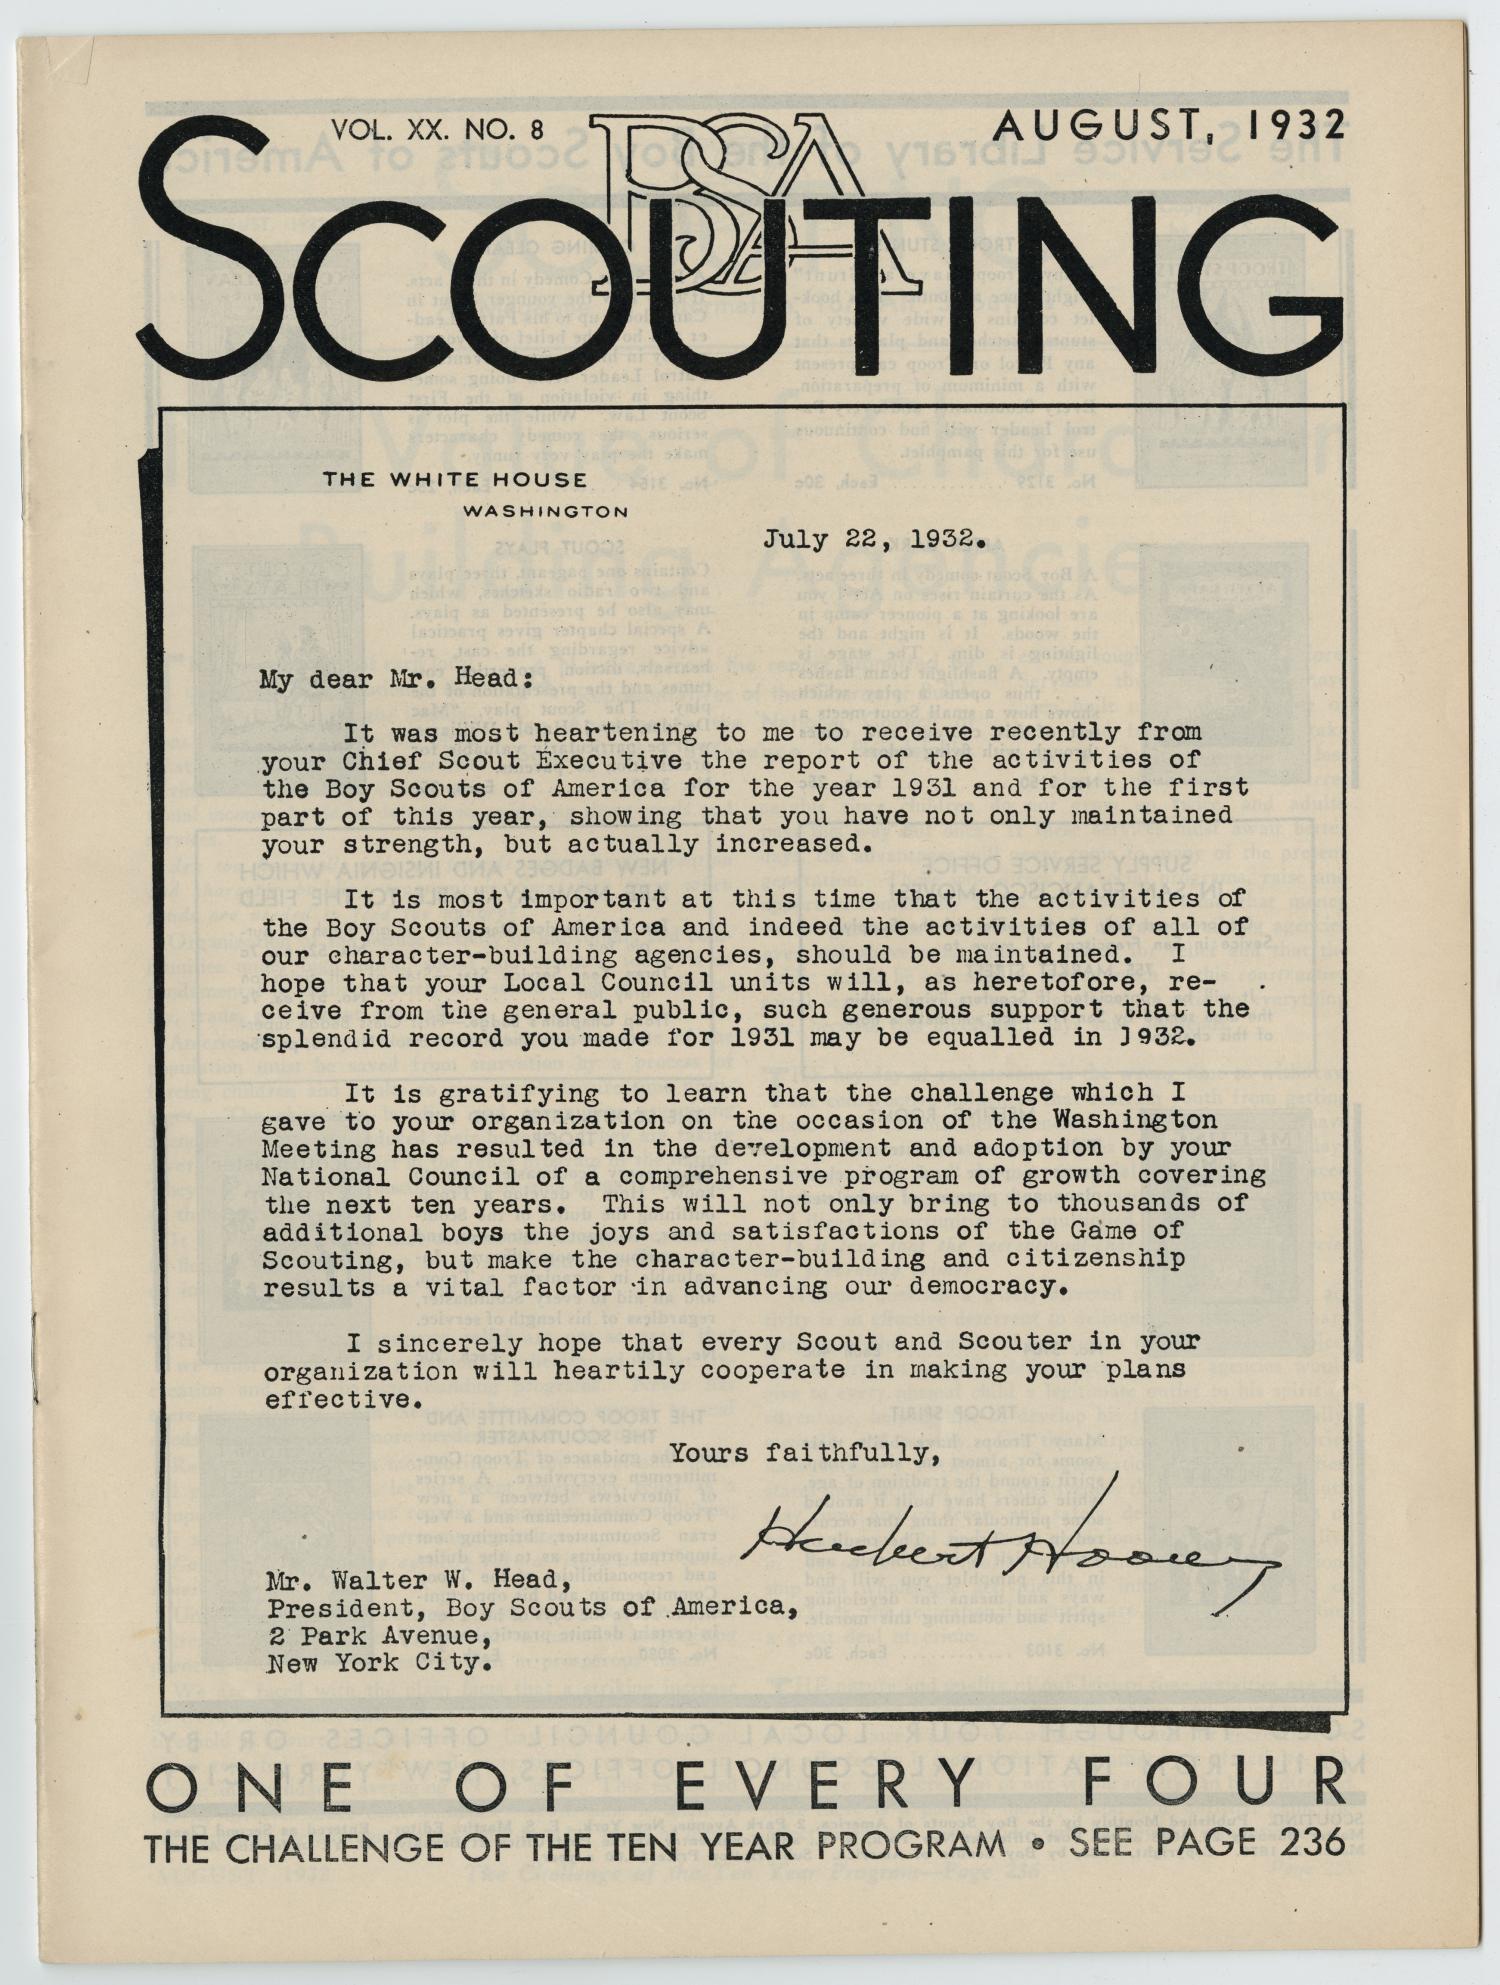 Scouting, Volume 20, Number 8, August 1932
                                                
                                                    221
                                                